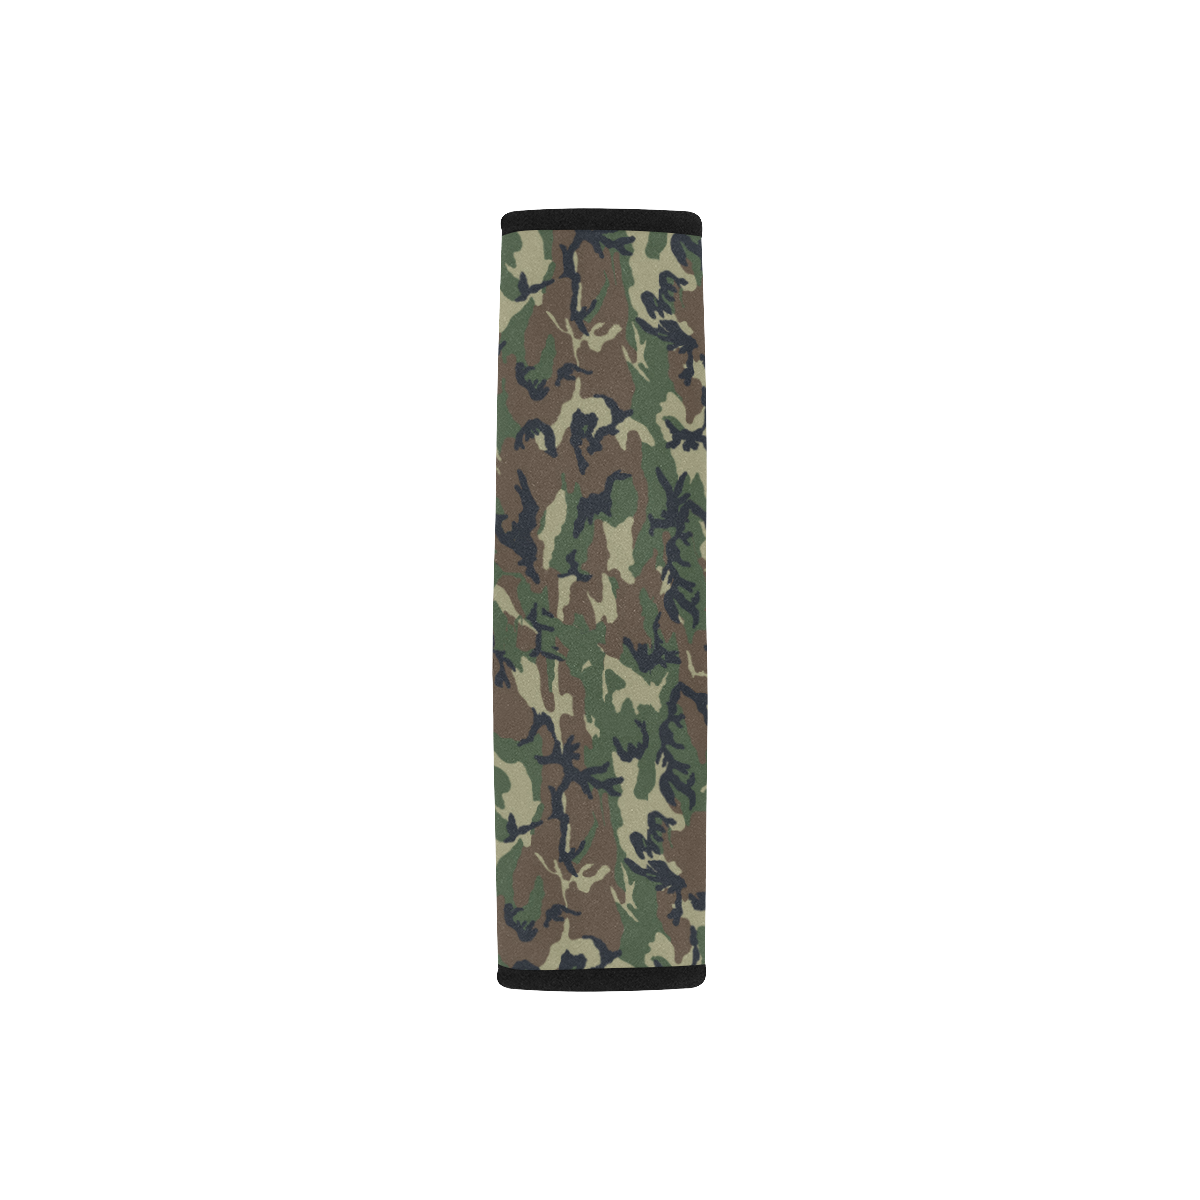 Woodland Forest Green Camouflage Car Seat Belt Cover 7''x8.5''